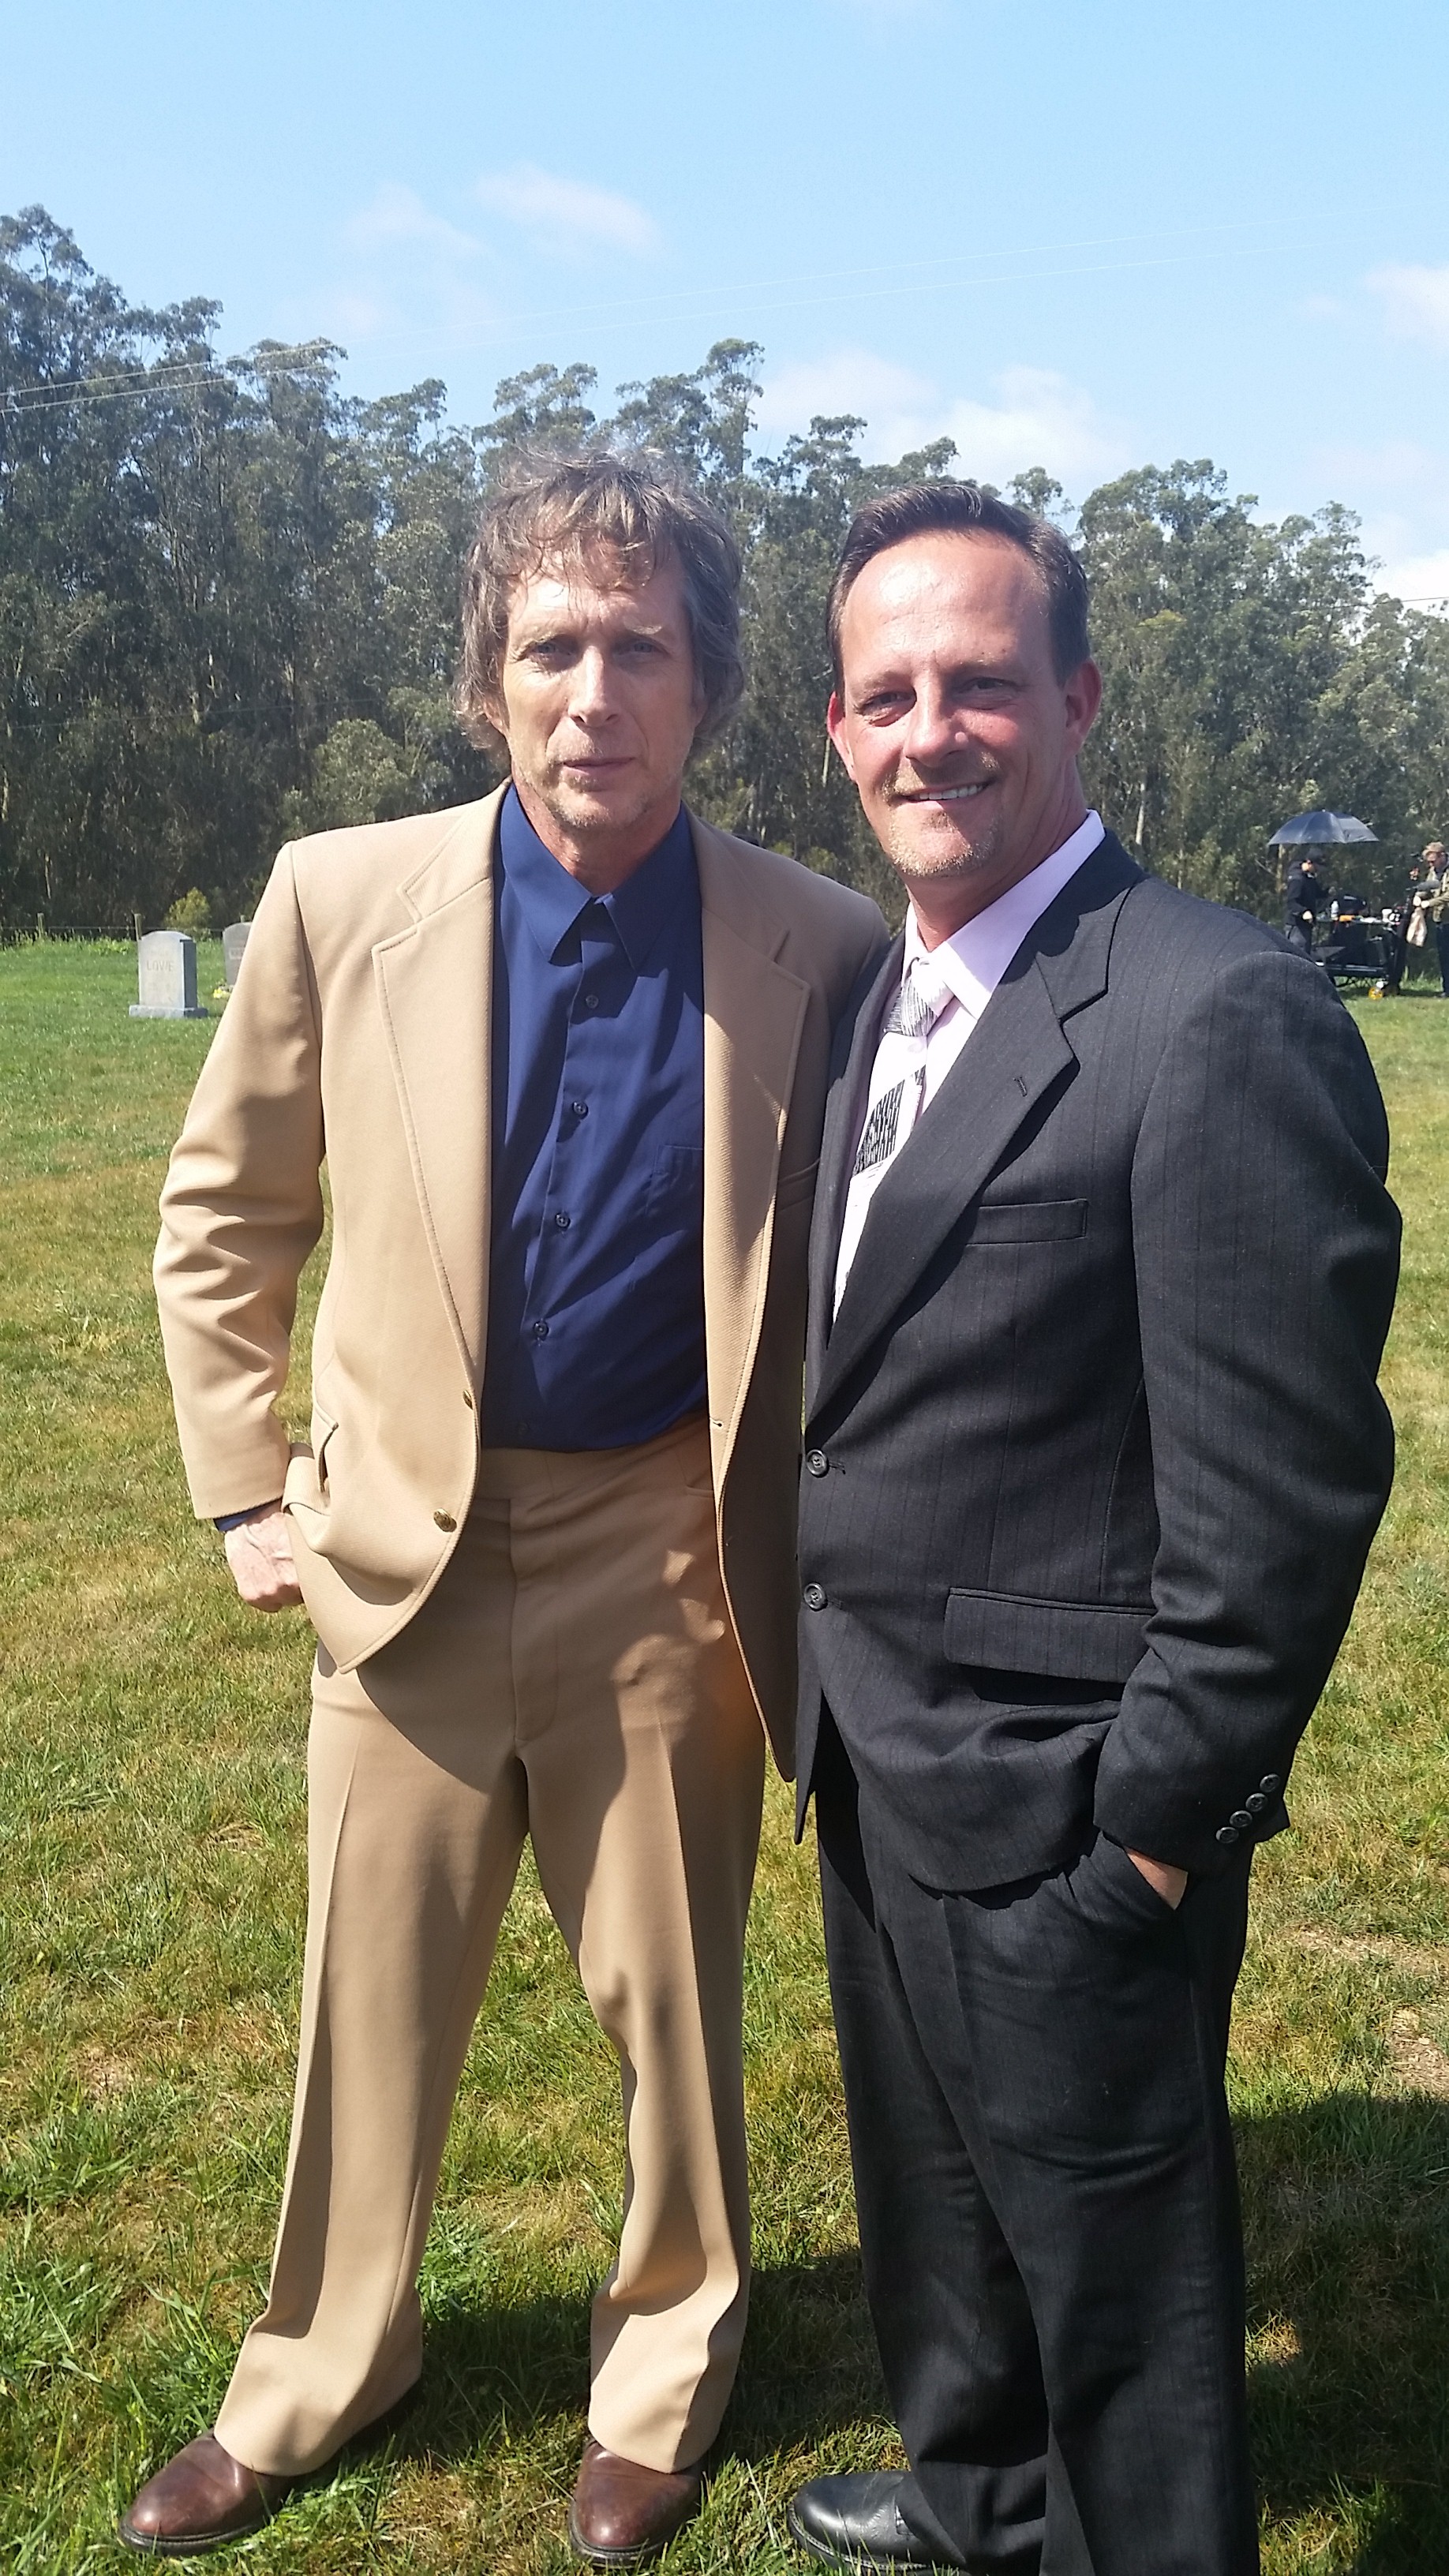 Tom O'Reilly and William Fichtner on the Set of THE WIZARD (2015)